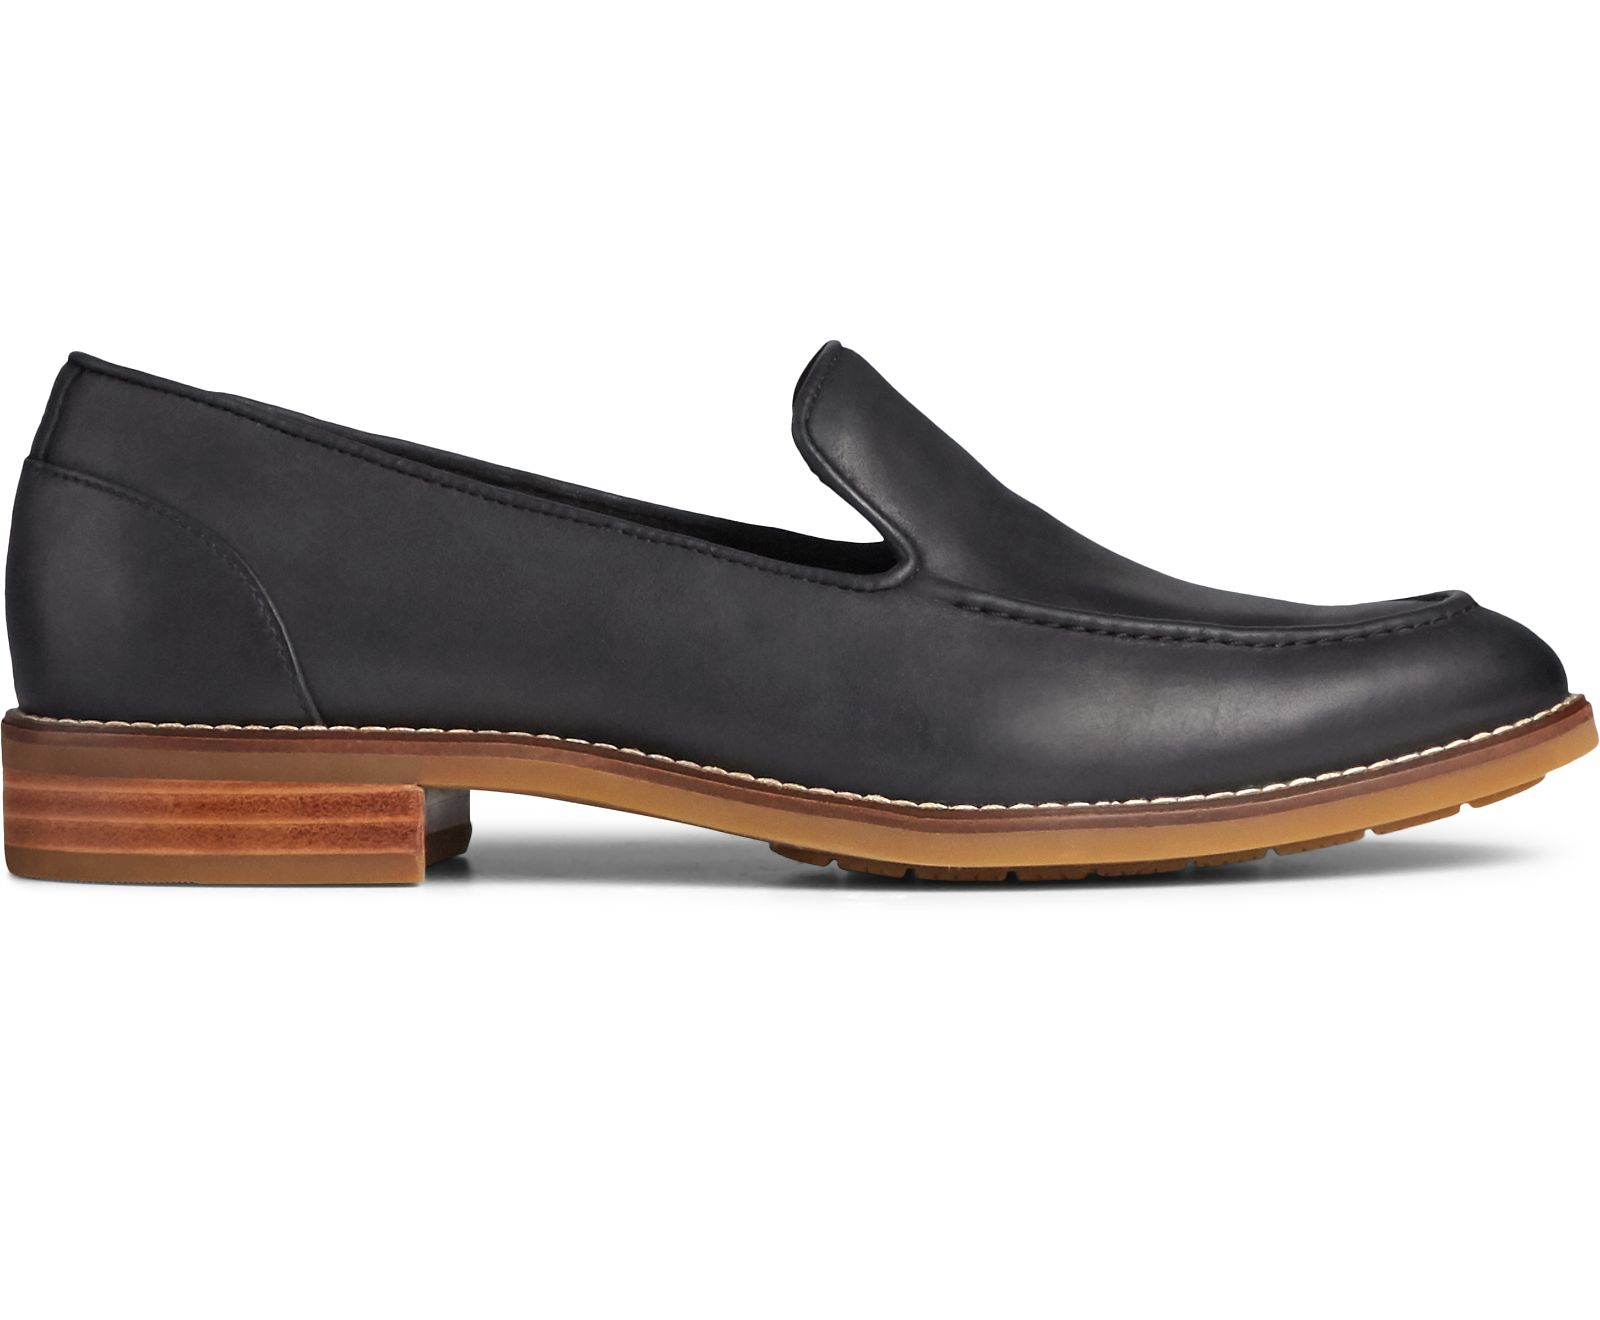 Women's Fairpoint Leather Loafer - Black